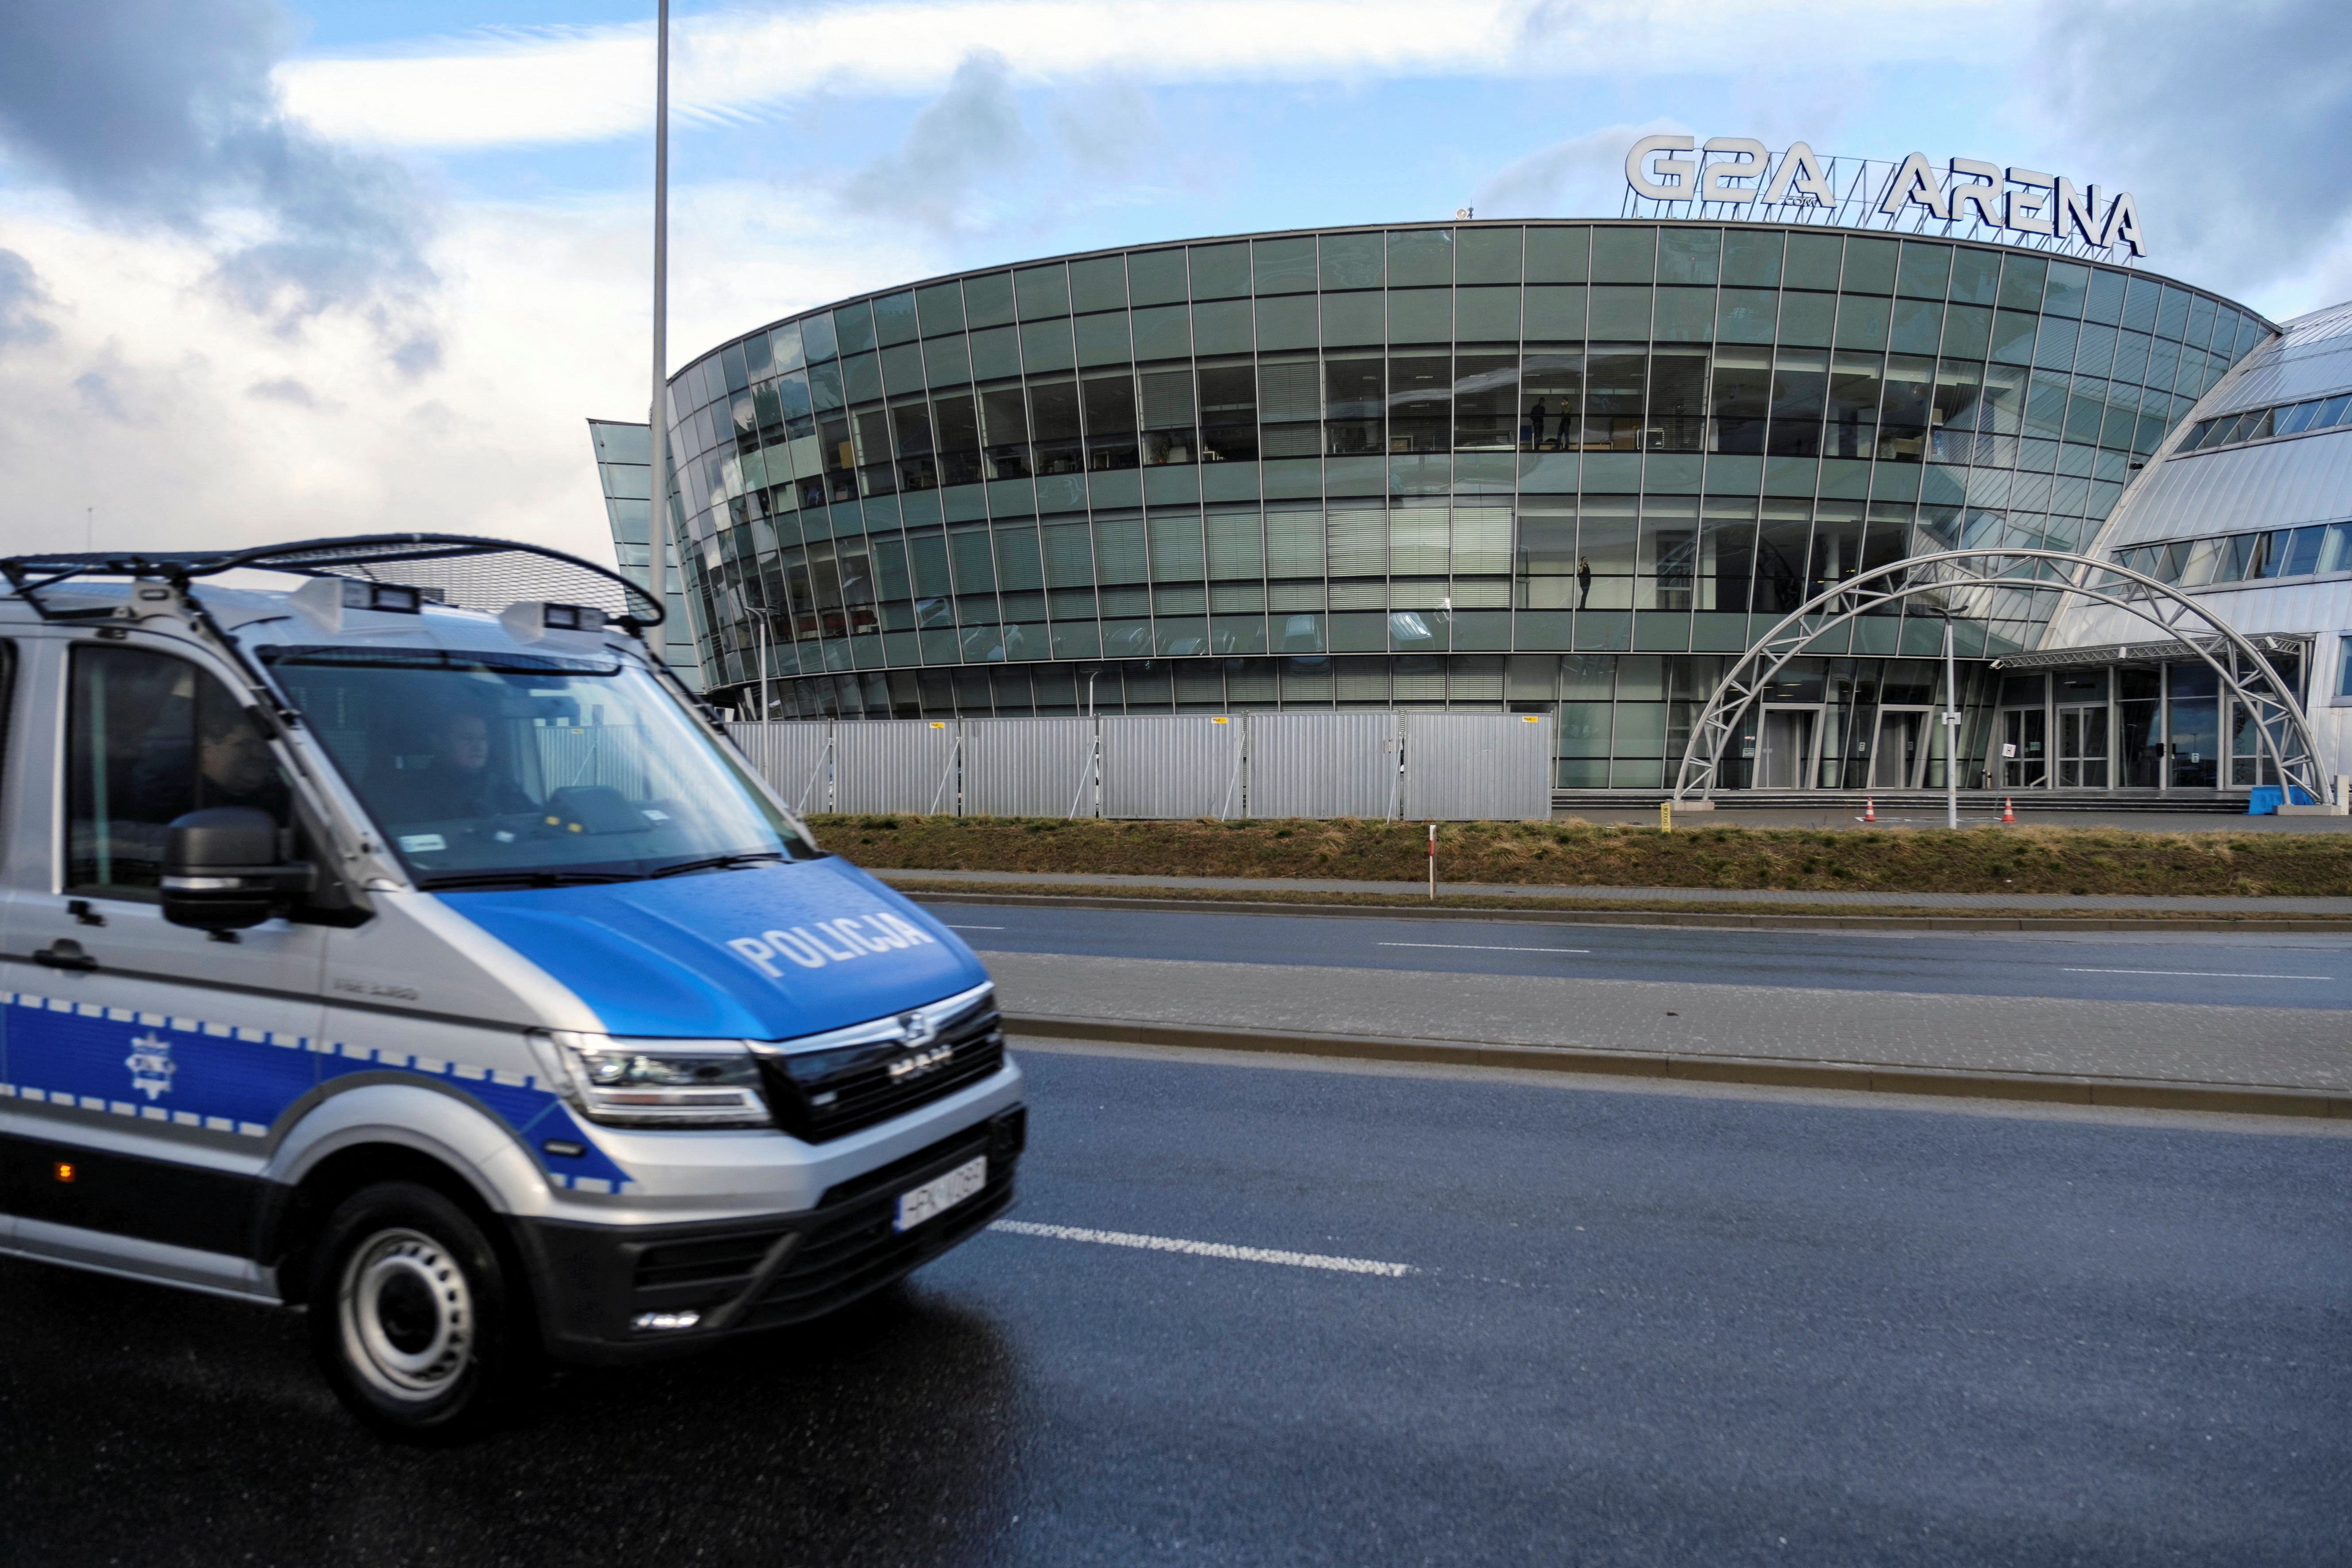 A police vehicle drives past by G2A Arena, in Jasionka near Rzeszow